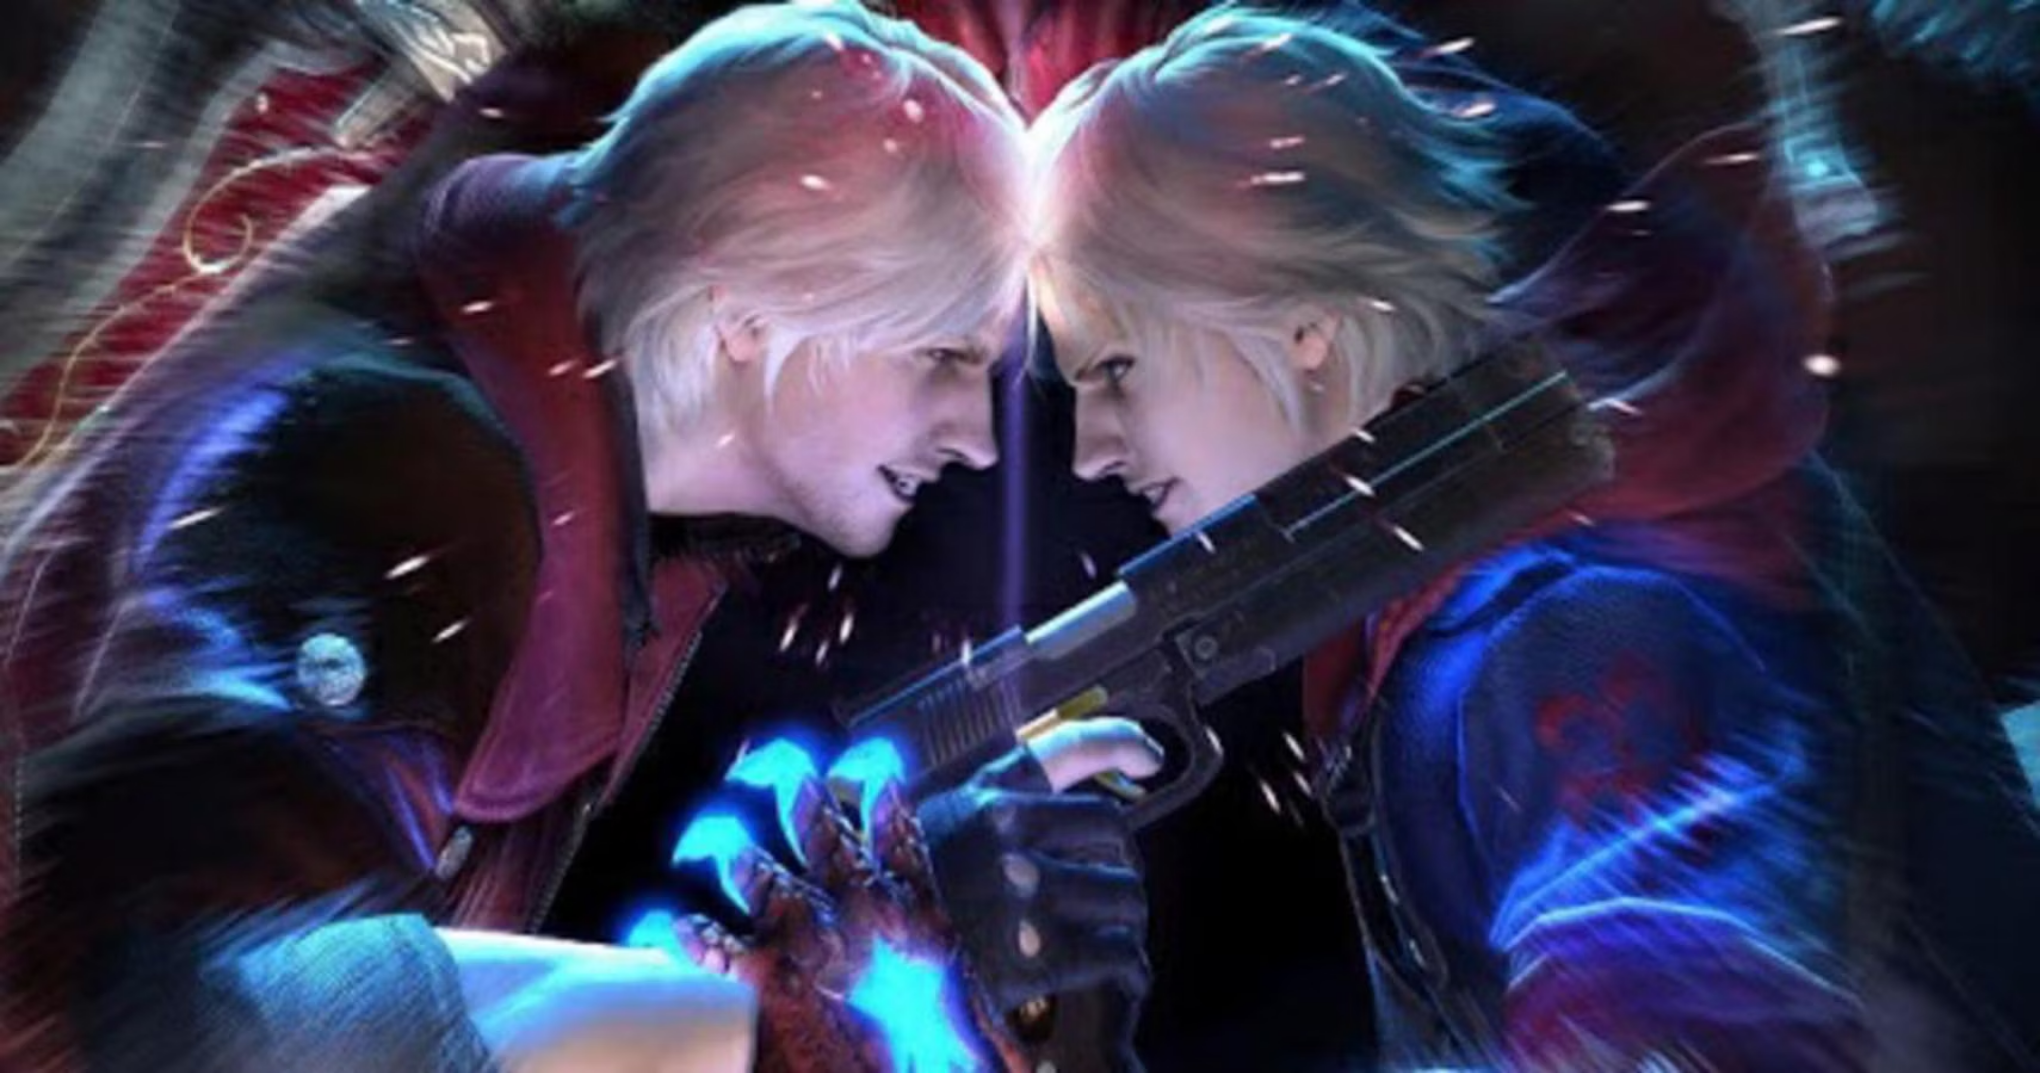 Free Fire reveals Devil May Cry 5 global collab event - Niche Gamer